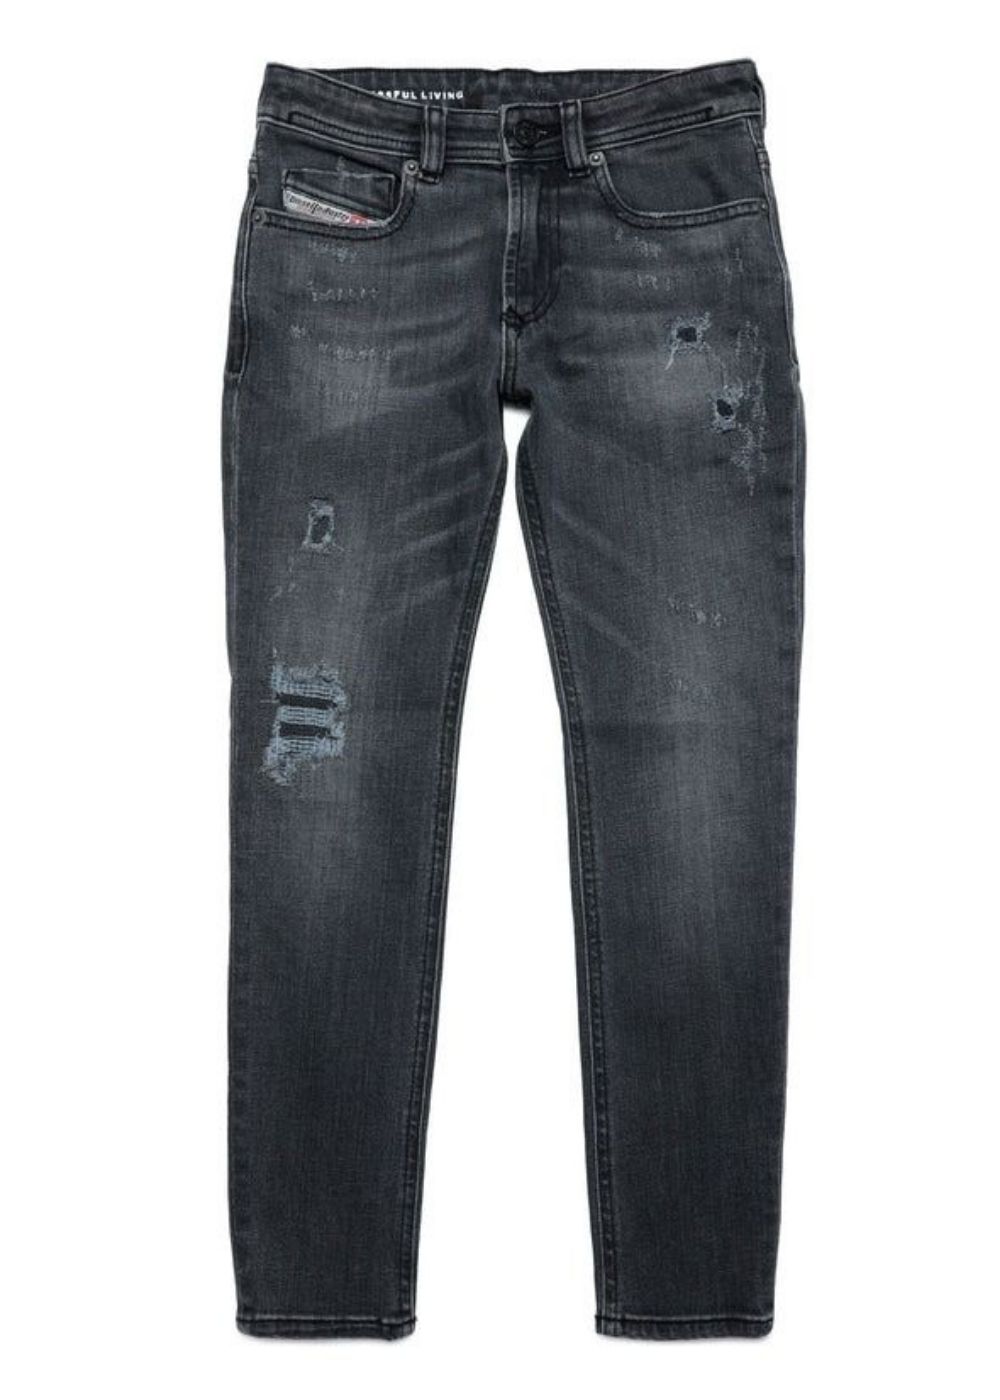 Featured image for “Diesel Jeans Grigio”